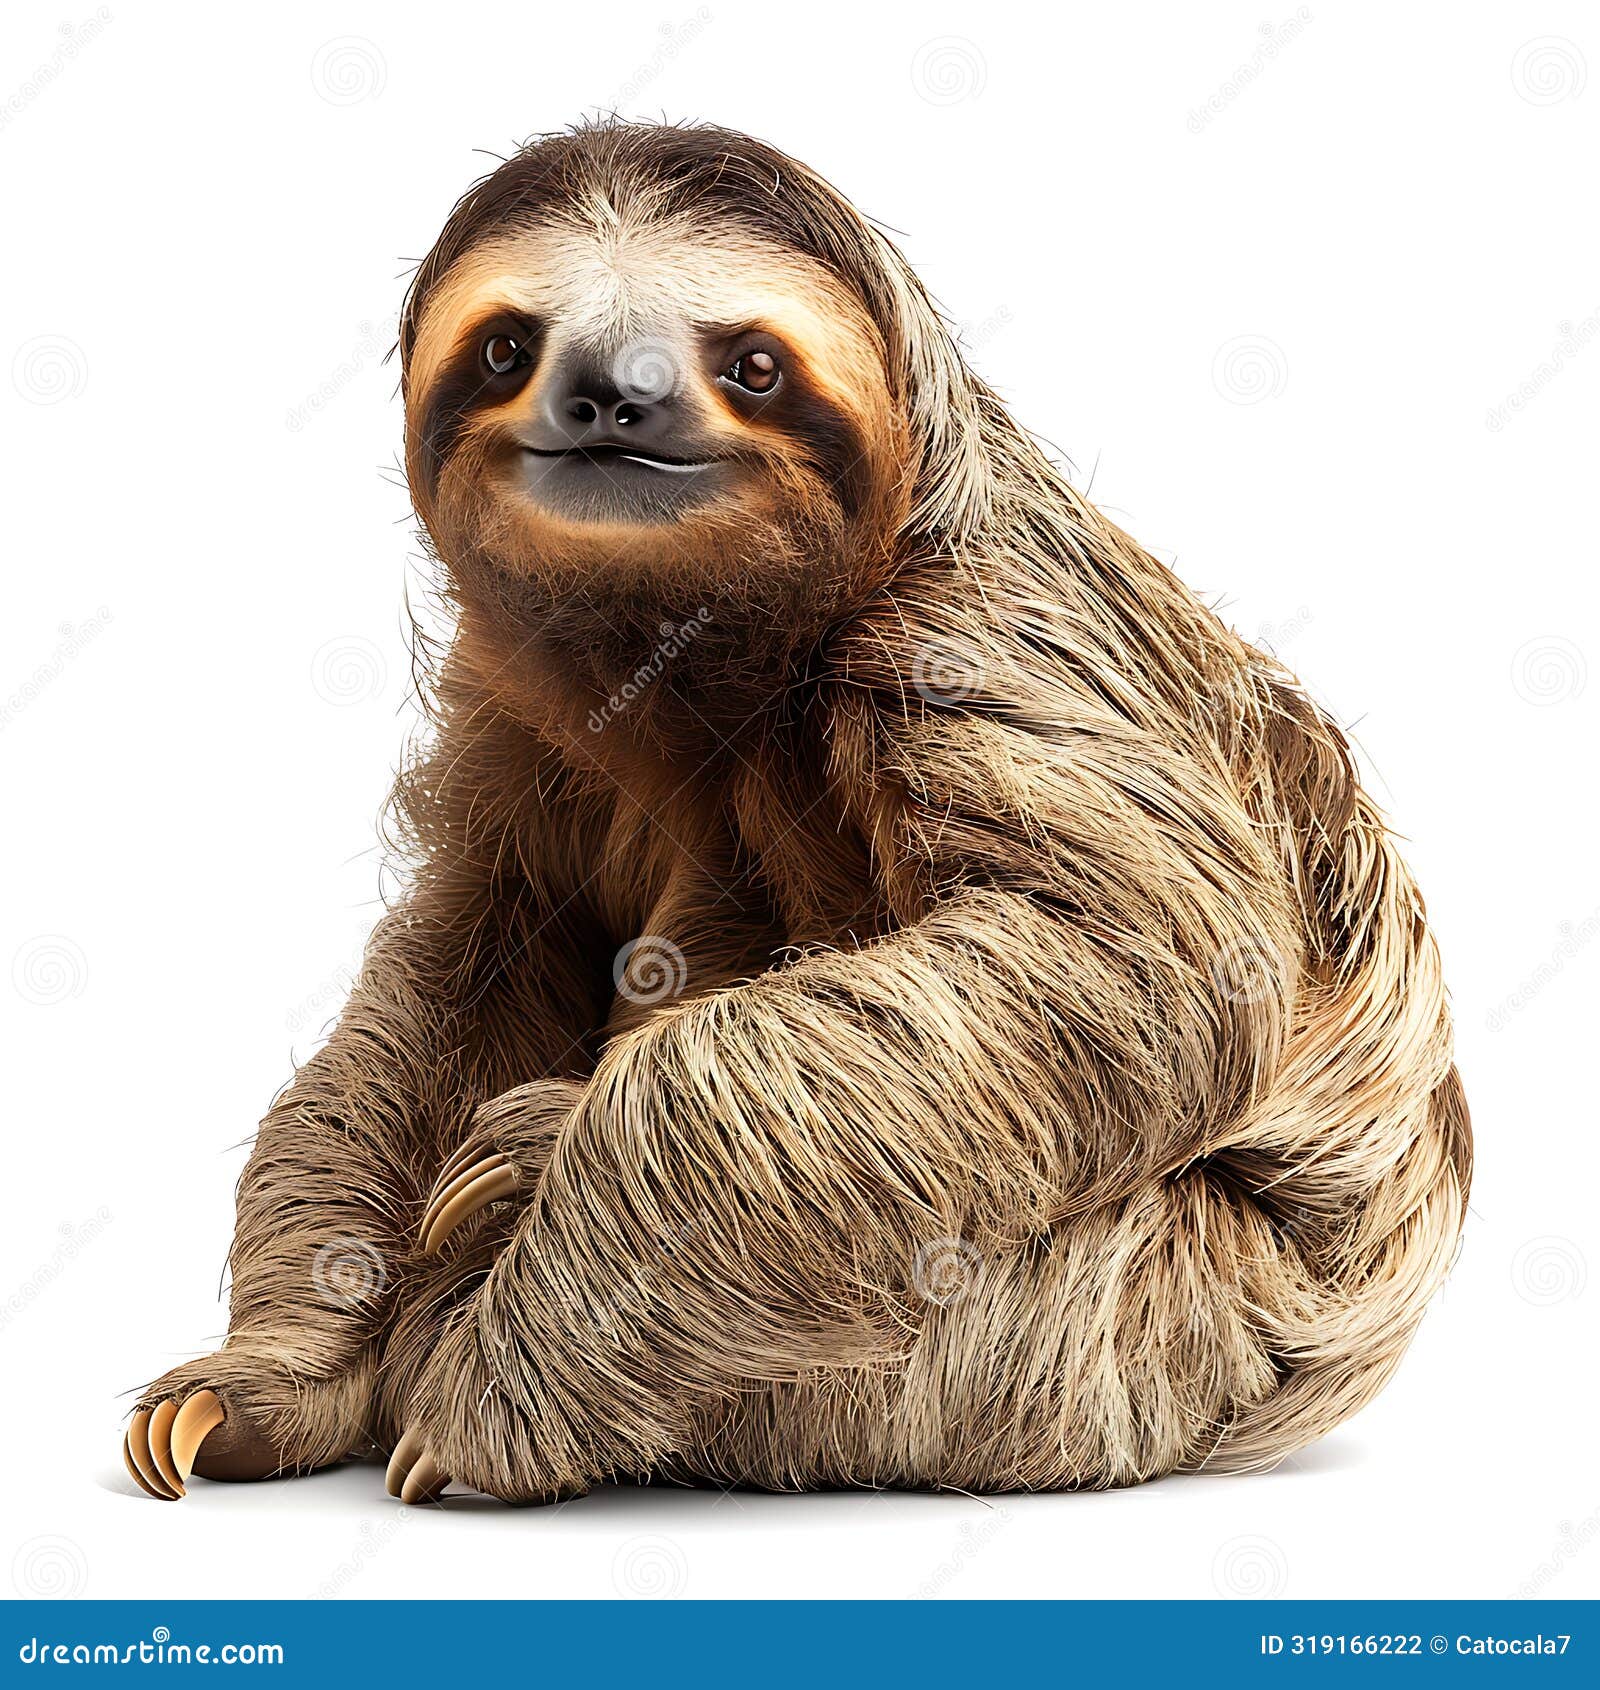 sloth, bradypus, an unusual arboreal south american animal with long claws, portrait, close-up,  on white